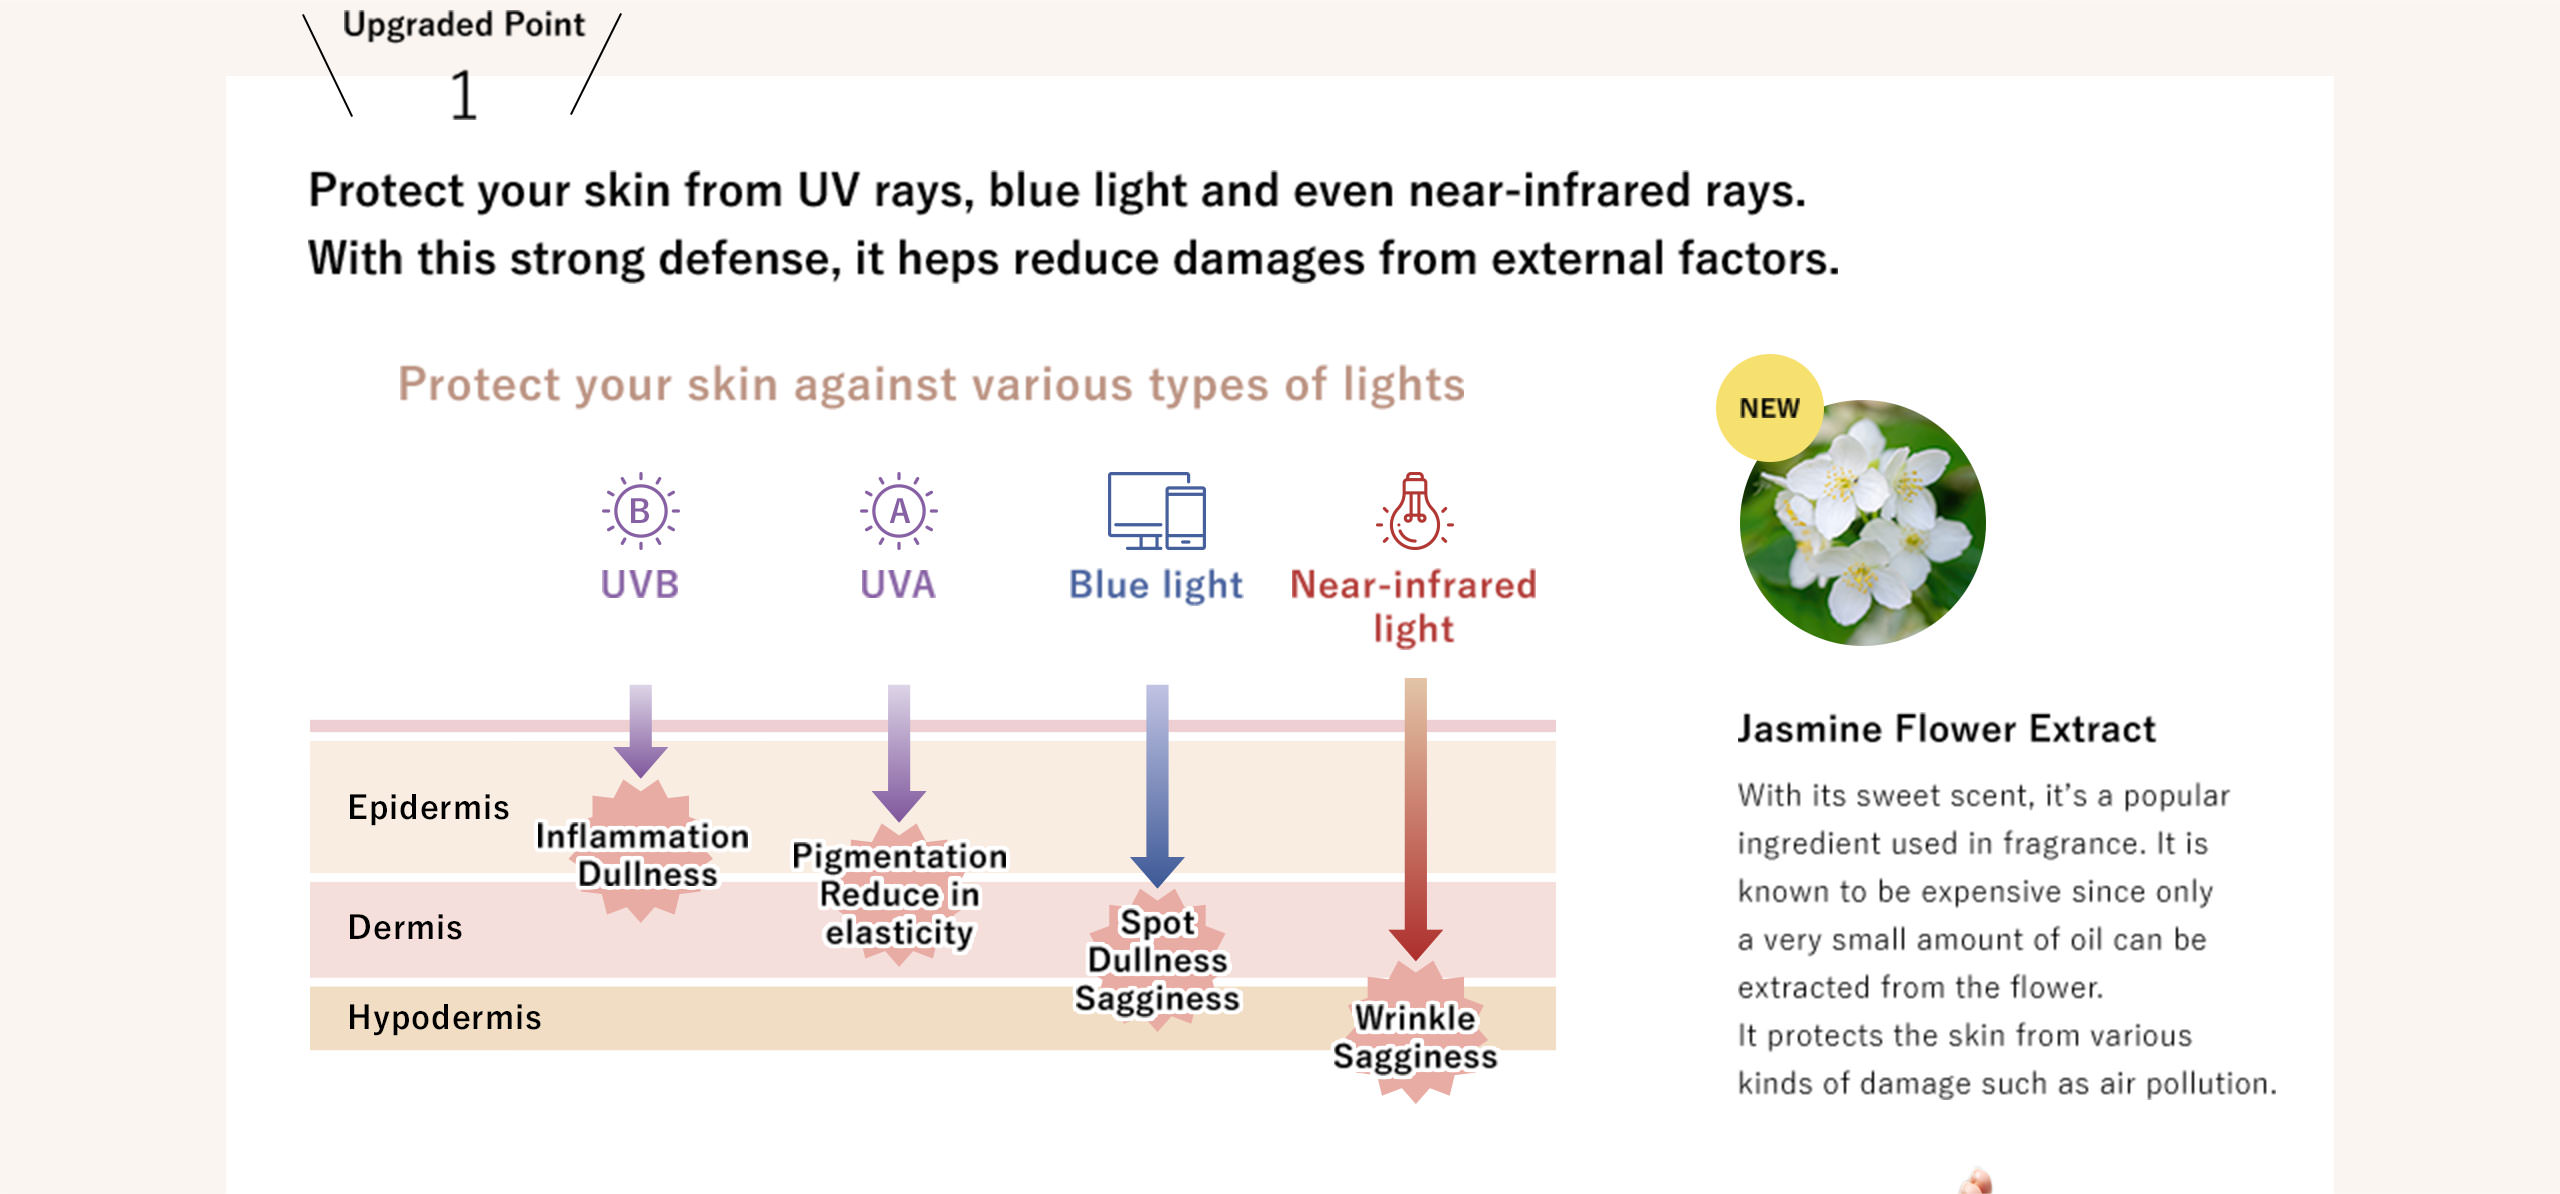 Upgraded Point 1: Protect your skin from UV rays, blue light and even near-infrared rays. With this strong defense, it heps reduce damages from external factors.